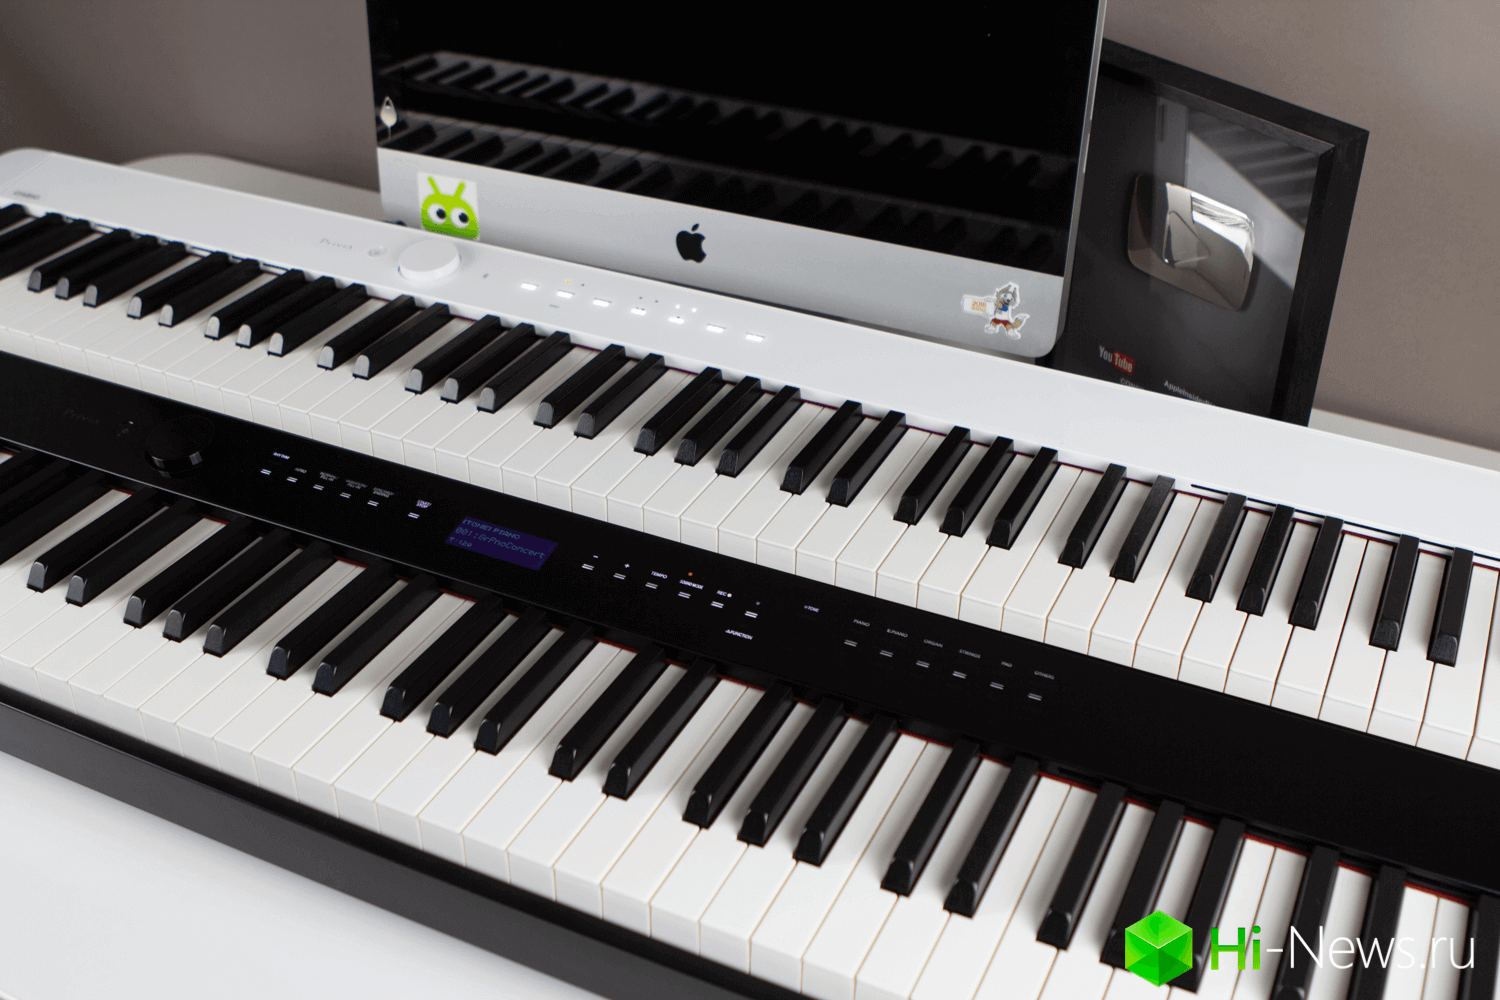 Played in the most compact and technologically advanced piano. There are even Bluetooth